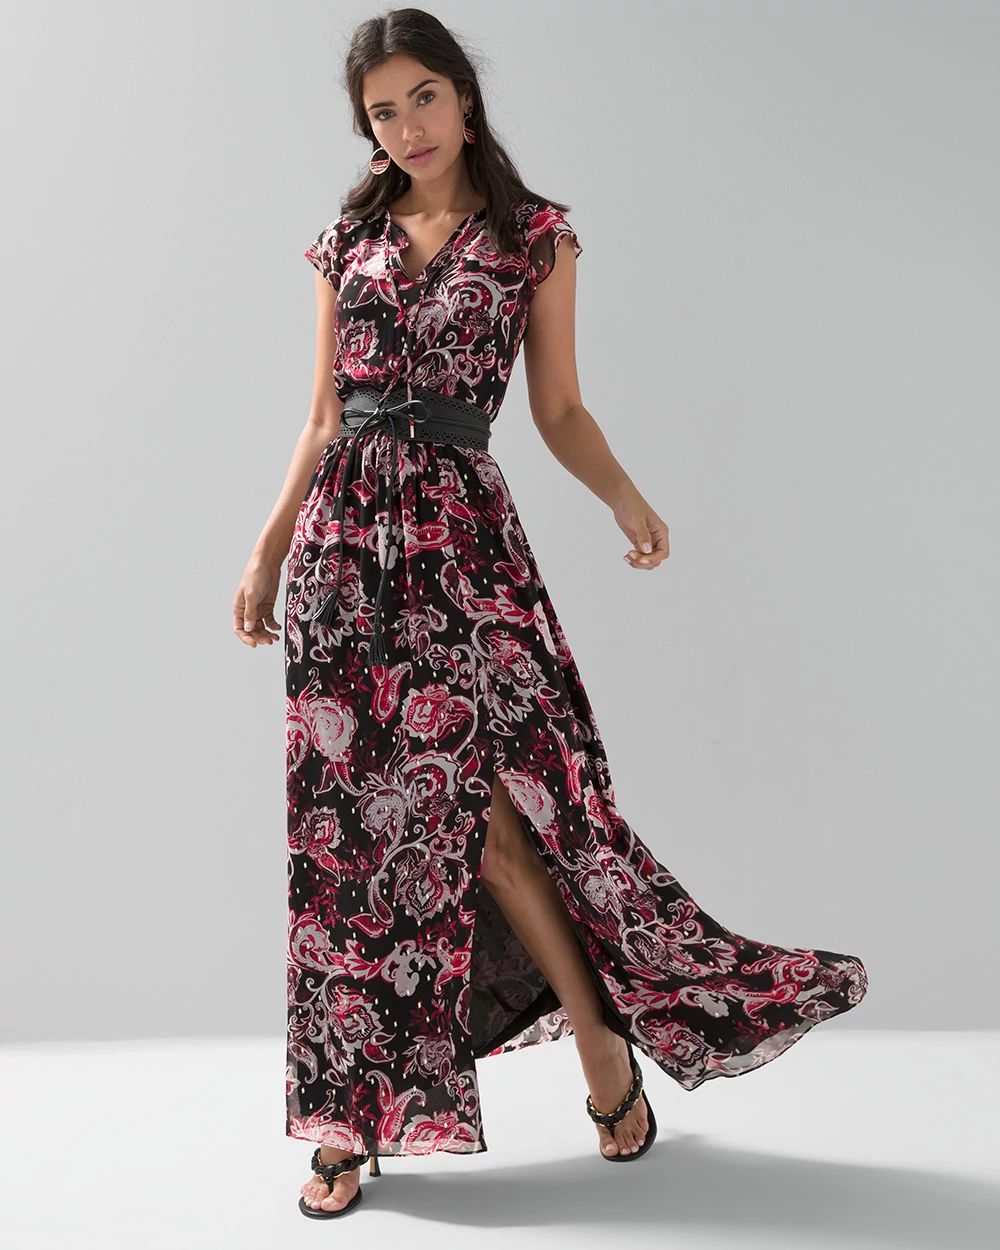 Flutter Sleeve Maxi Dress click to view larger image.